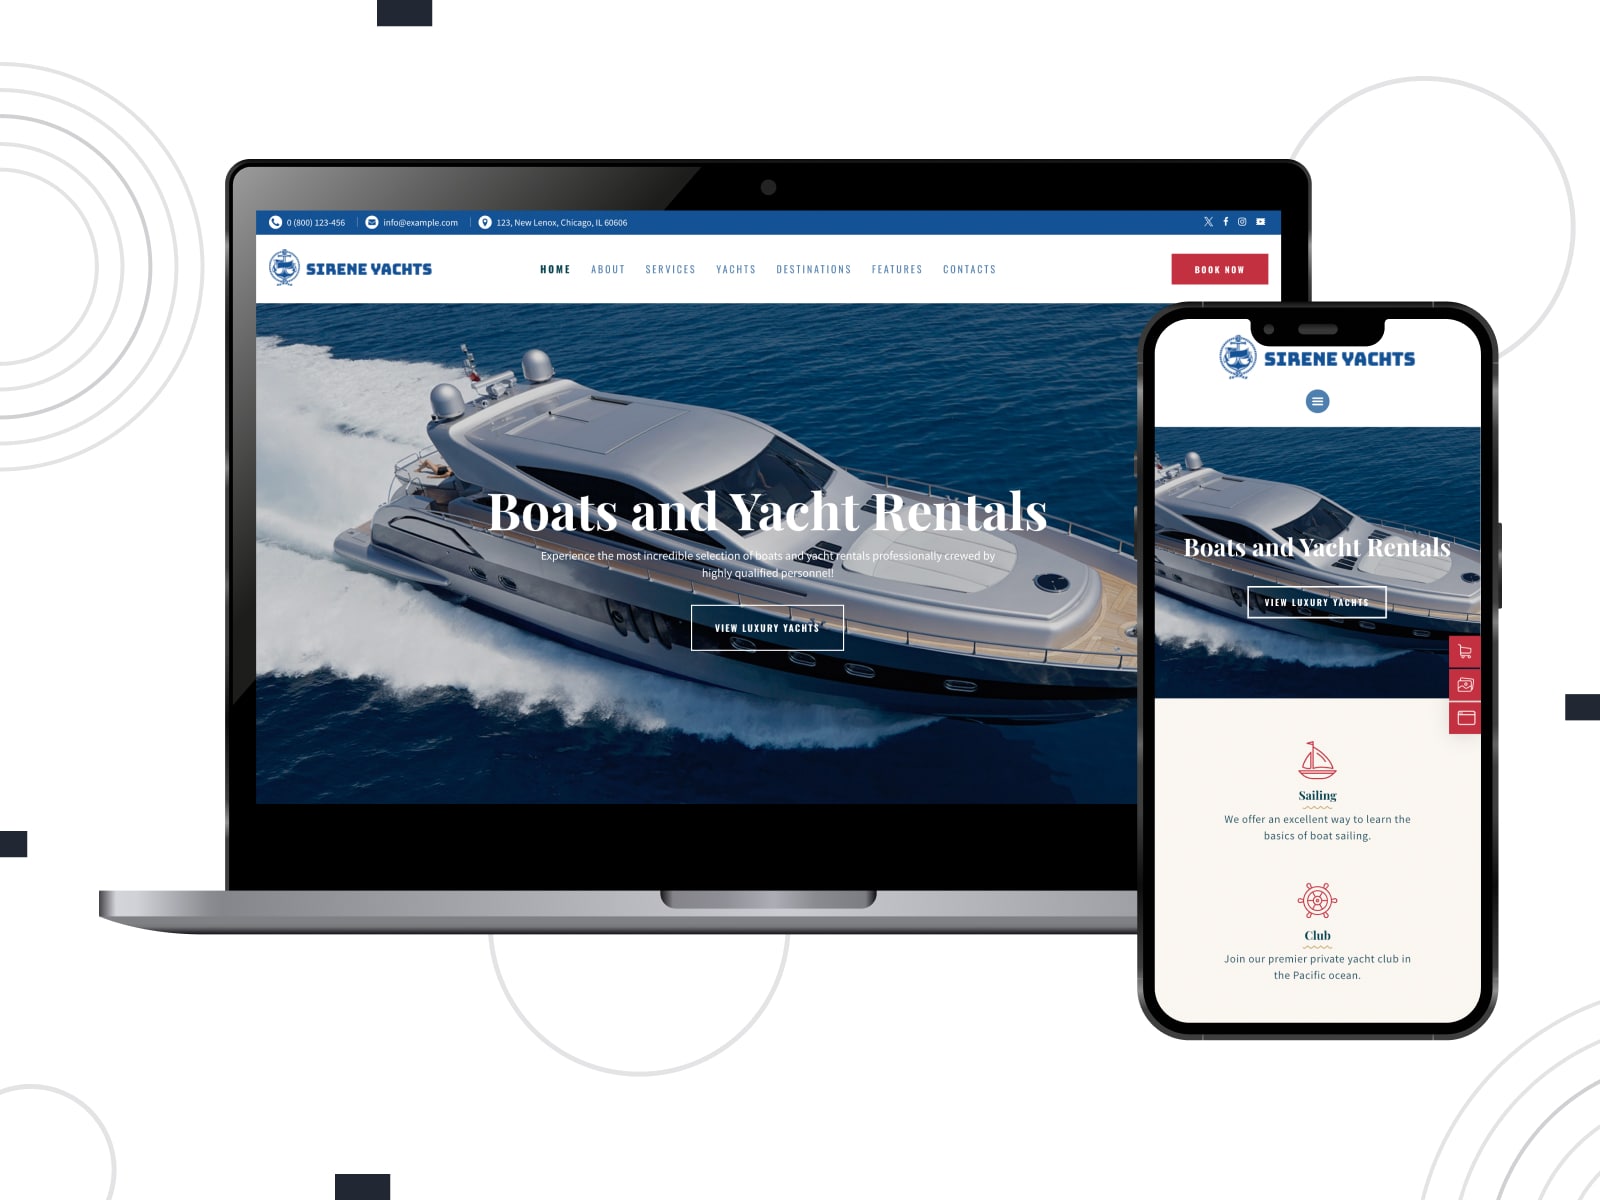 Collage of the Sirene yach and boat rental WordPress themes for websites in blue and white colors on dektop and mobile screens.